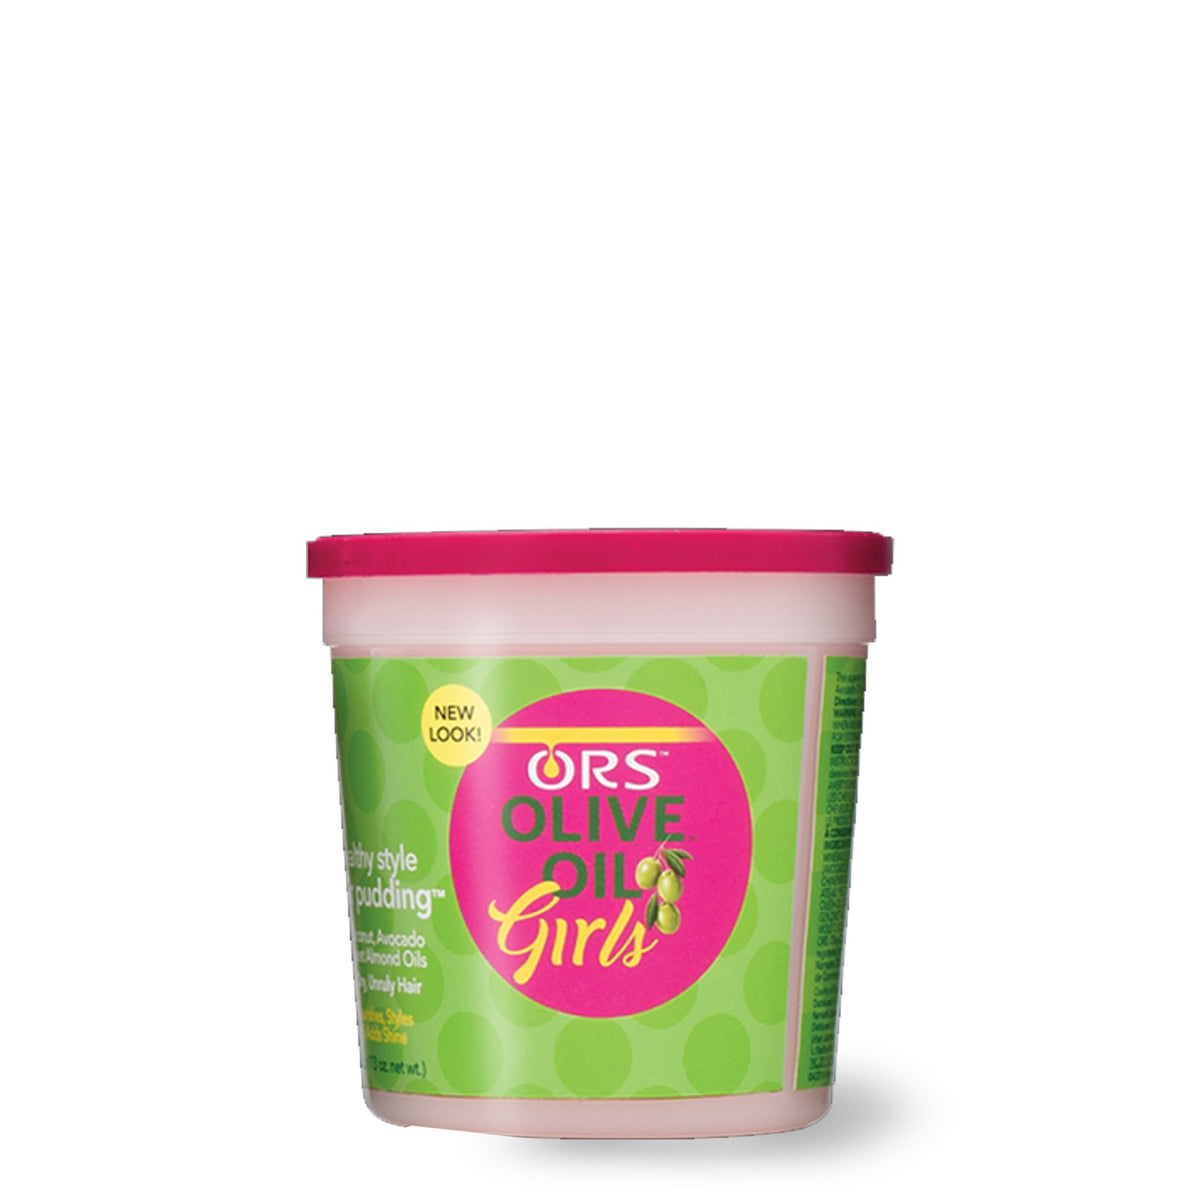 ORS (Olive Oil Girls) Hair Pudding 13oz-ORS- Hive Beauty Supply